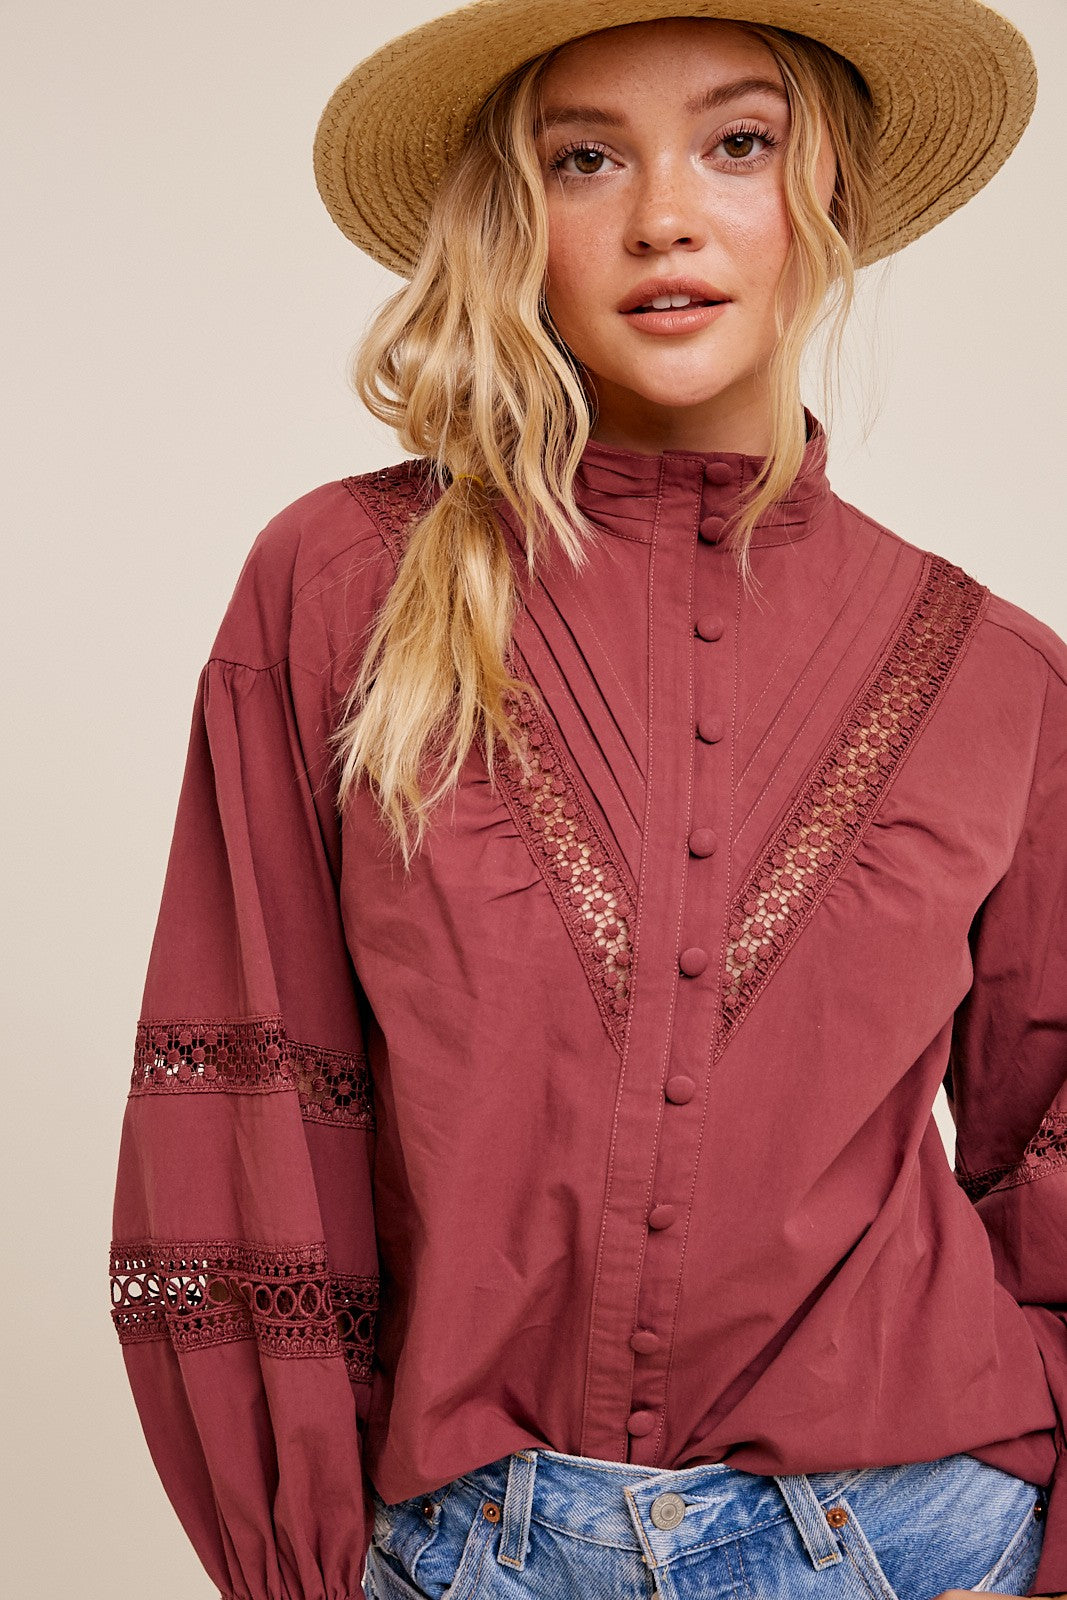 Eyelet Detailed Button Down Mock Neck Blouse Top